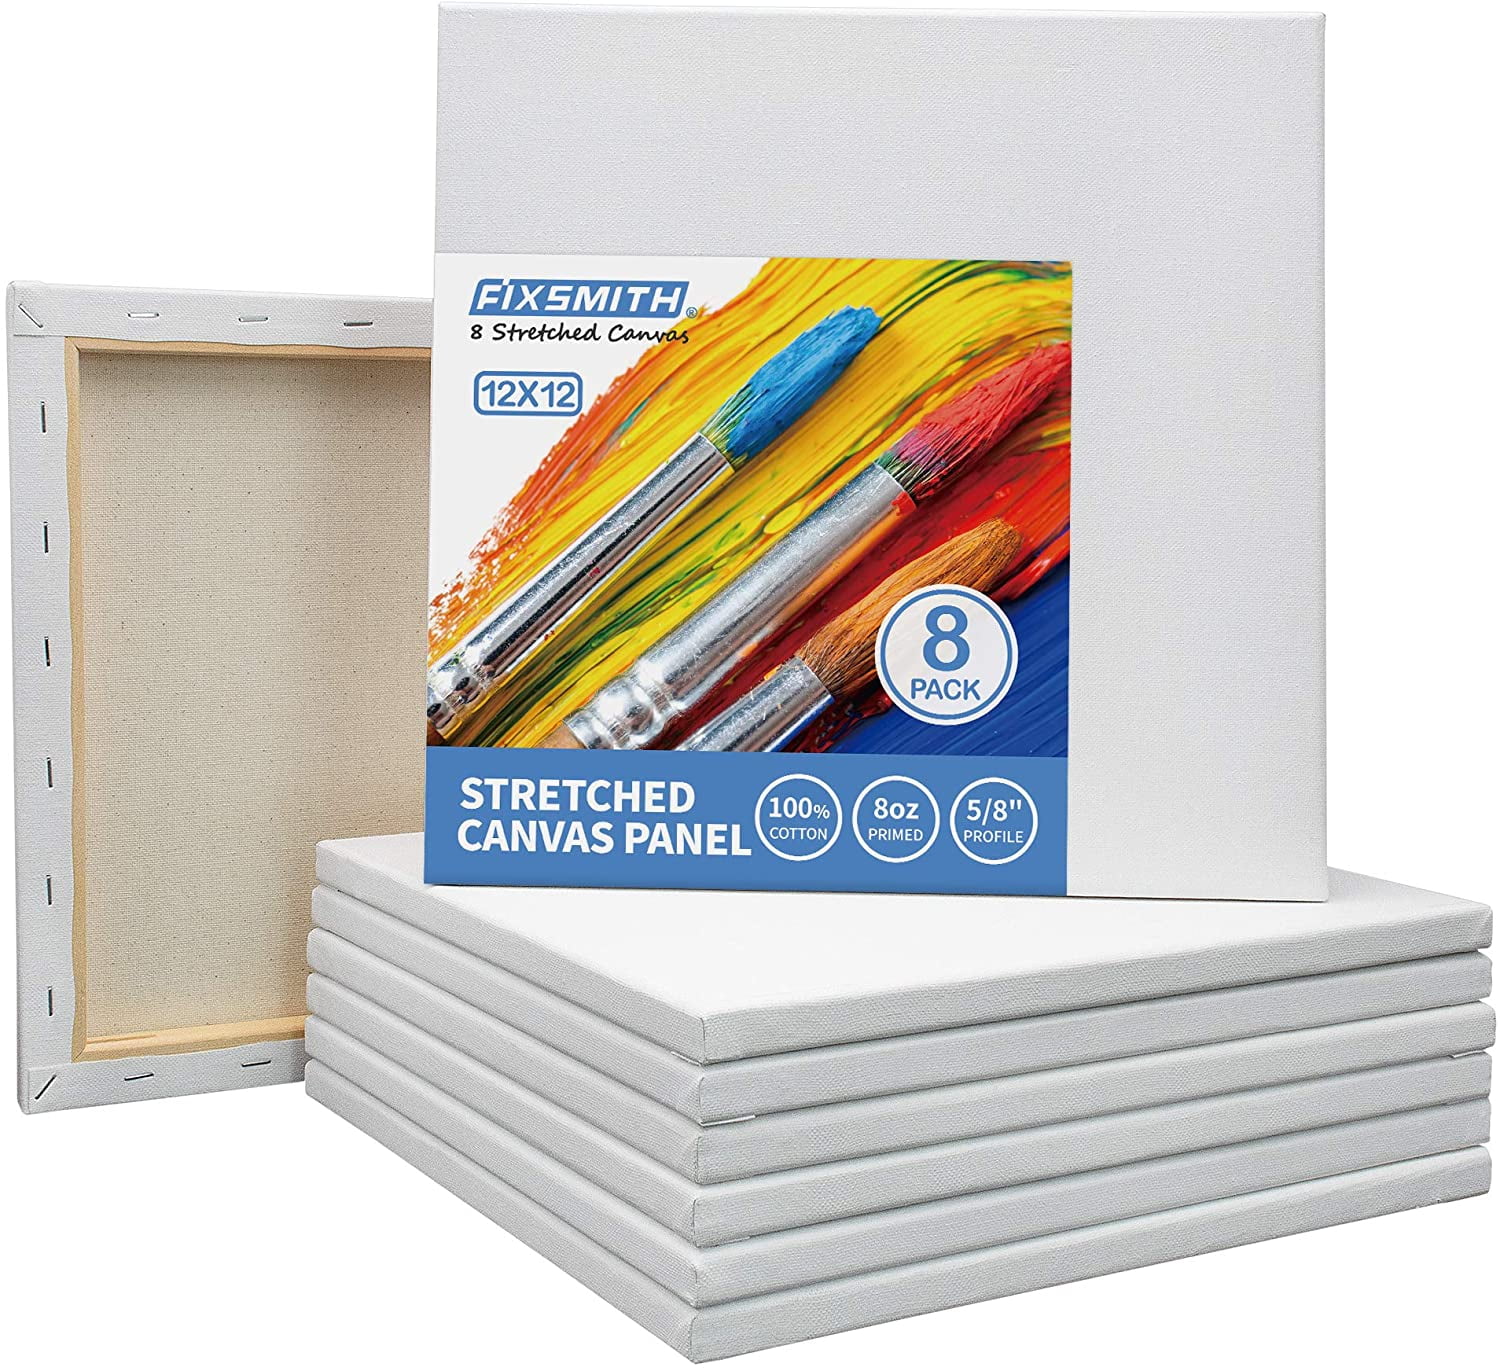 FIXSMITH Painting Canvas Panels 9 x12 Inch Canvas Panel Super Value 12 Pack,100% Cotton,Primed Canvas Board,Acid Free,Artist Canvas Boards for Professionals,Hobby Painters,Students & Kids. 